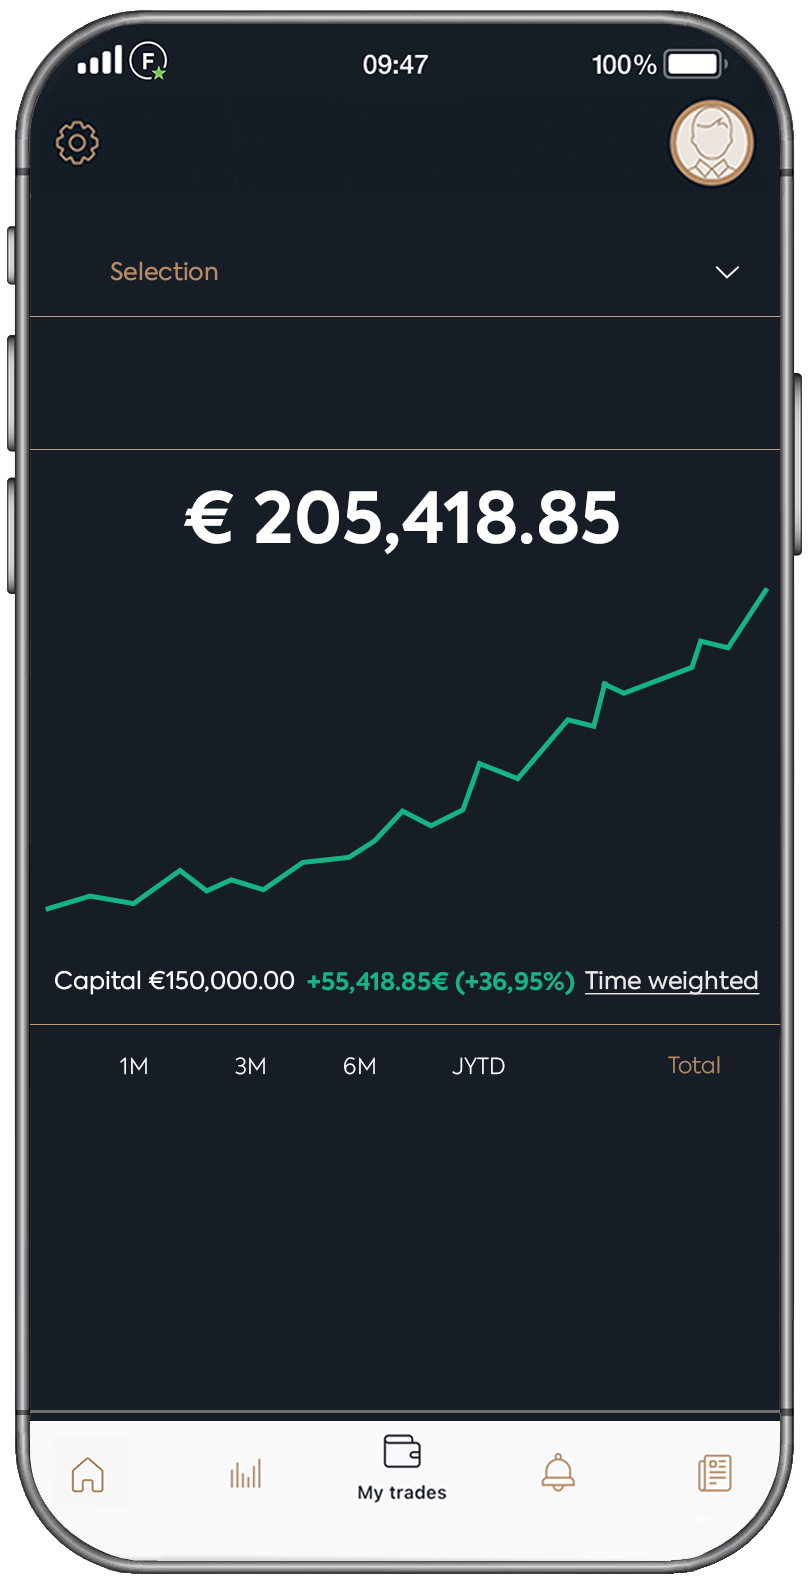 Financial app Follow MyMoney Chart display with a total volume of 205418.25 euros